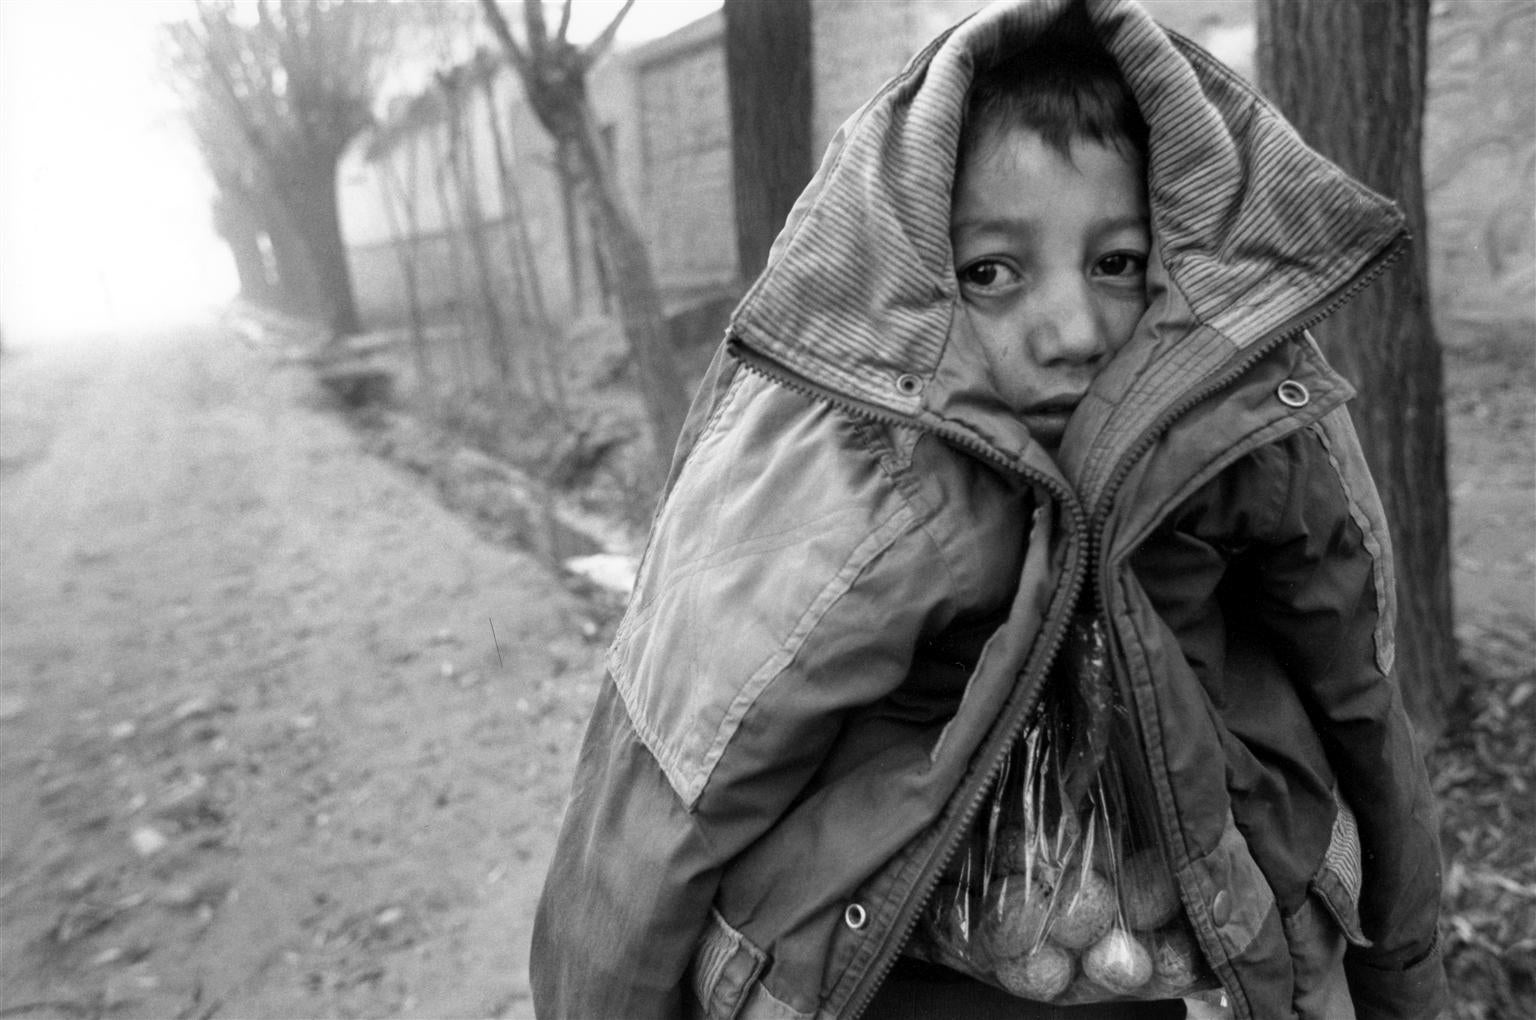 His coat pulled up over his head to protect him from the cold, a boy carrying a bag of nuts walks on a street in Faizabad